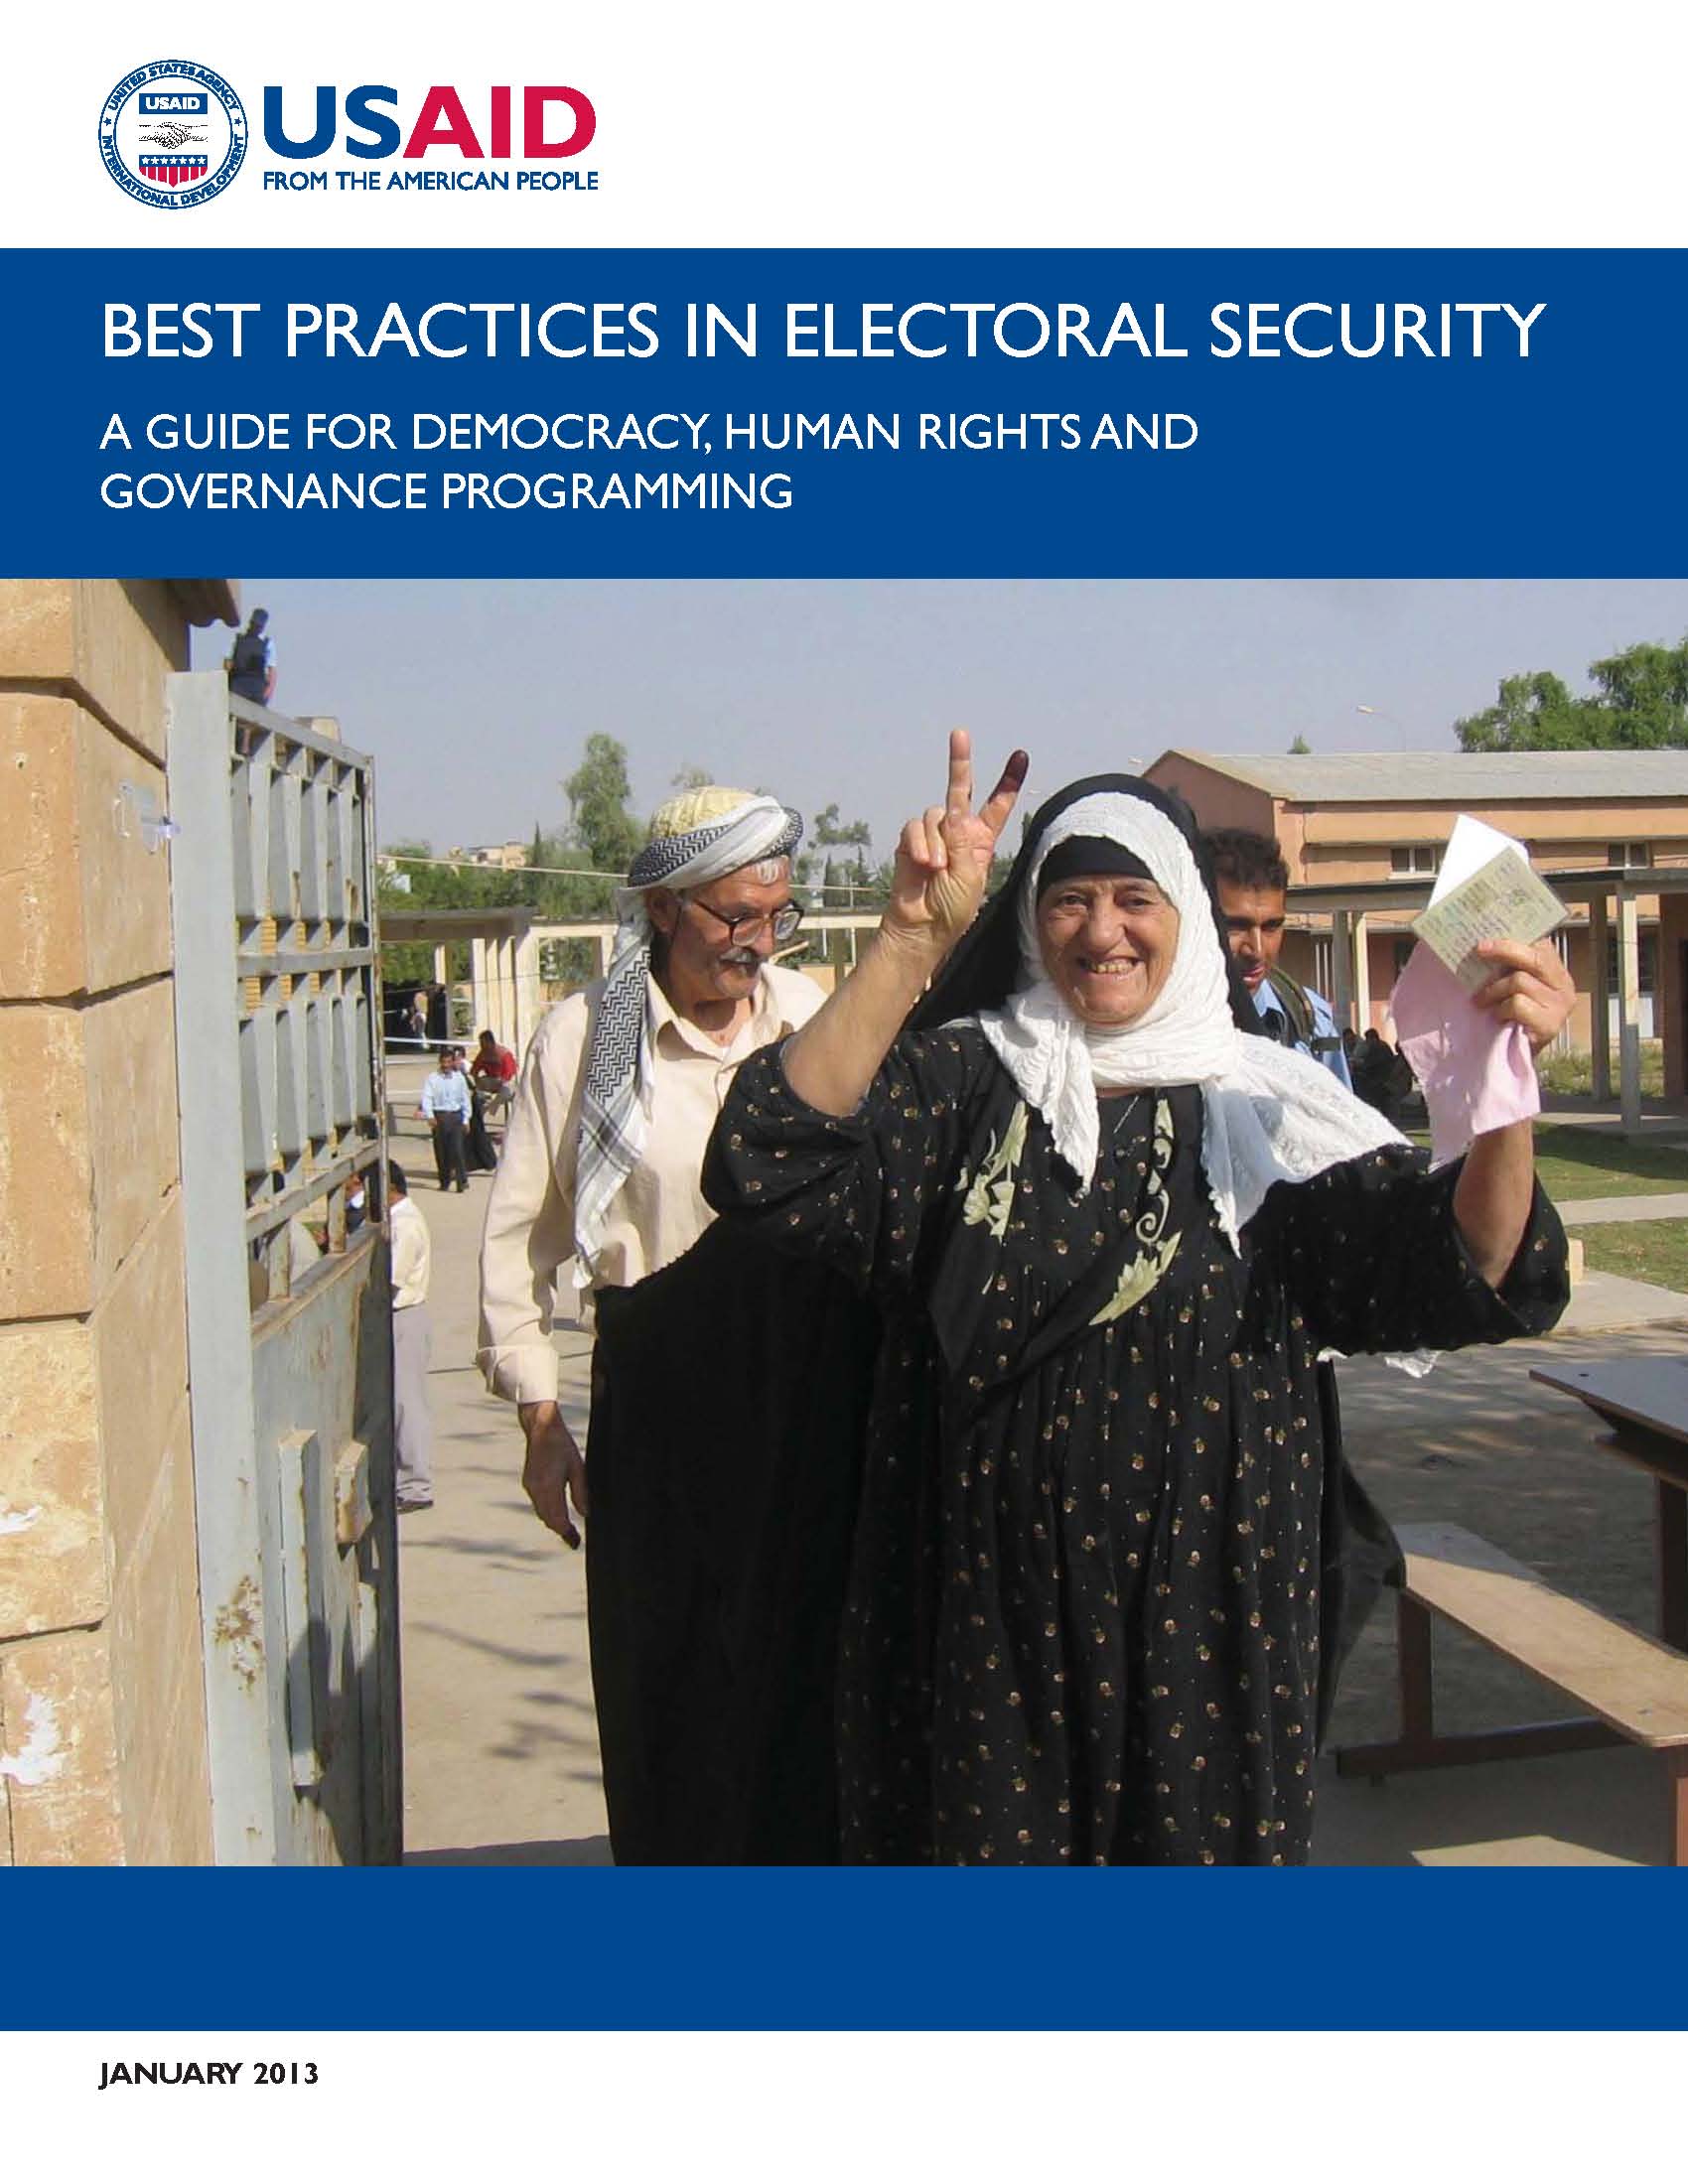 Electoral Security Best Practices Guide